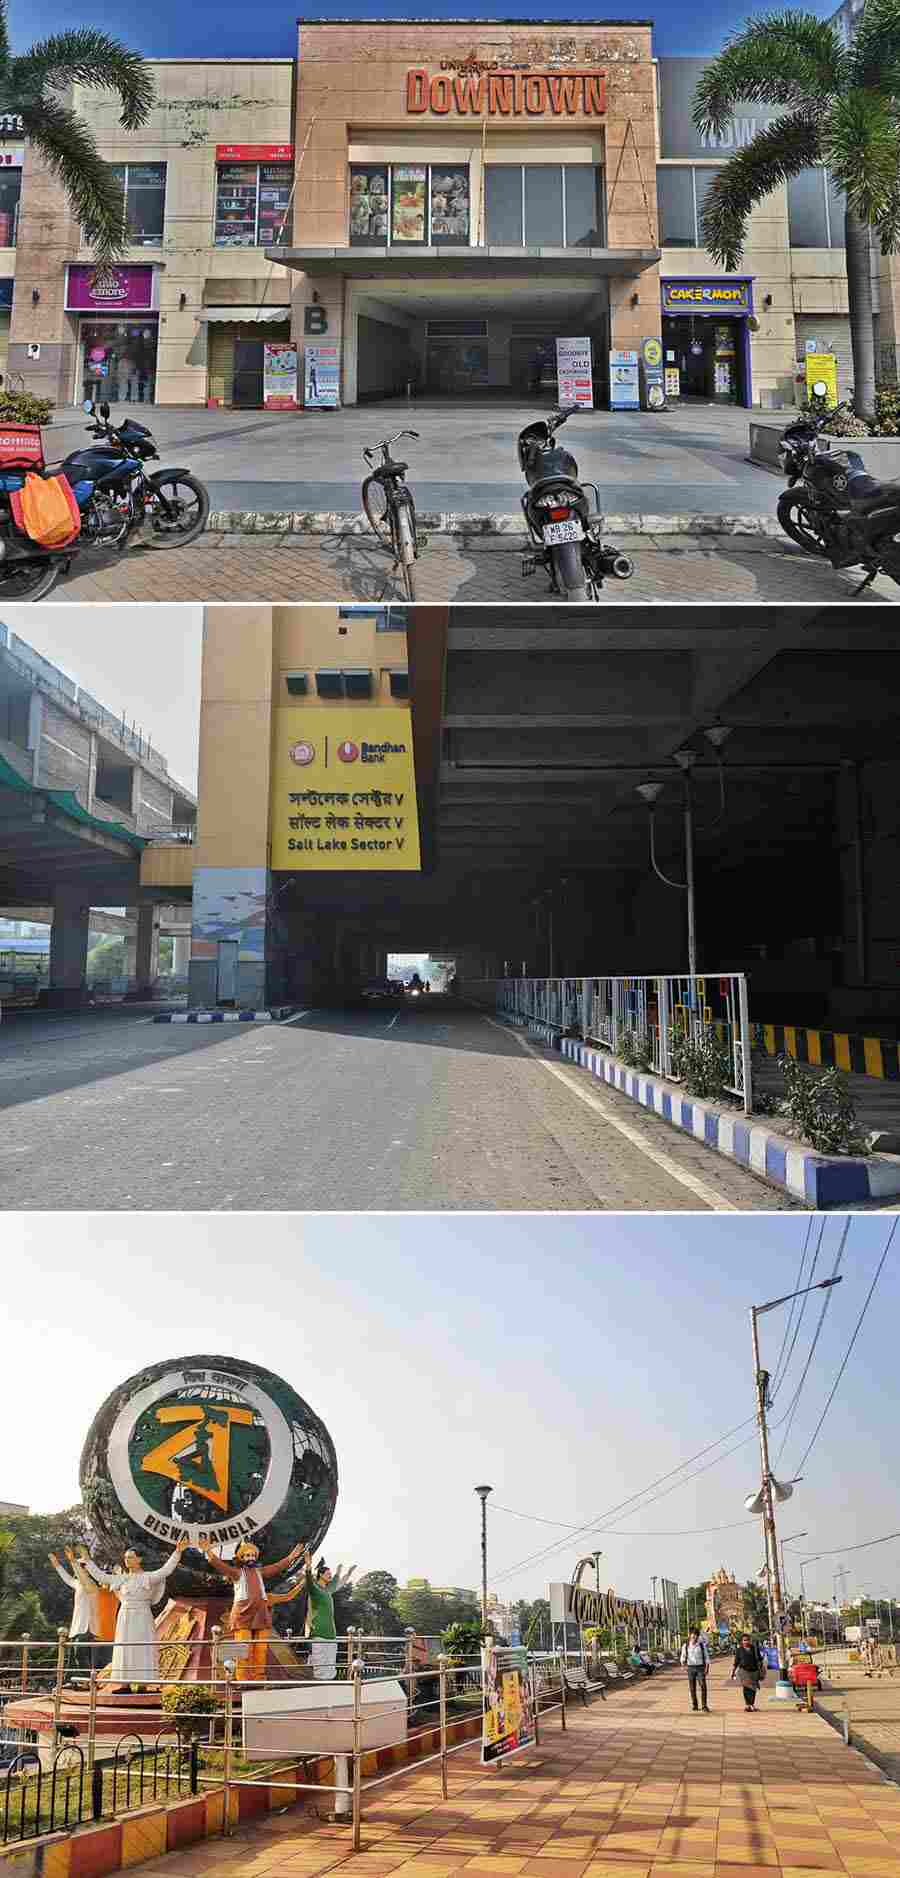 The participants were given clues that took them from (top to bottom) Downtown Mall at the extreme end of New Town, the newly built Salt Lake Sector V Metro Station, to Patuli Jheel Park, which lies at the city’s southern tip